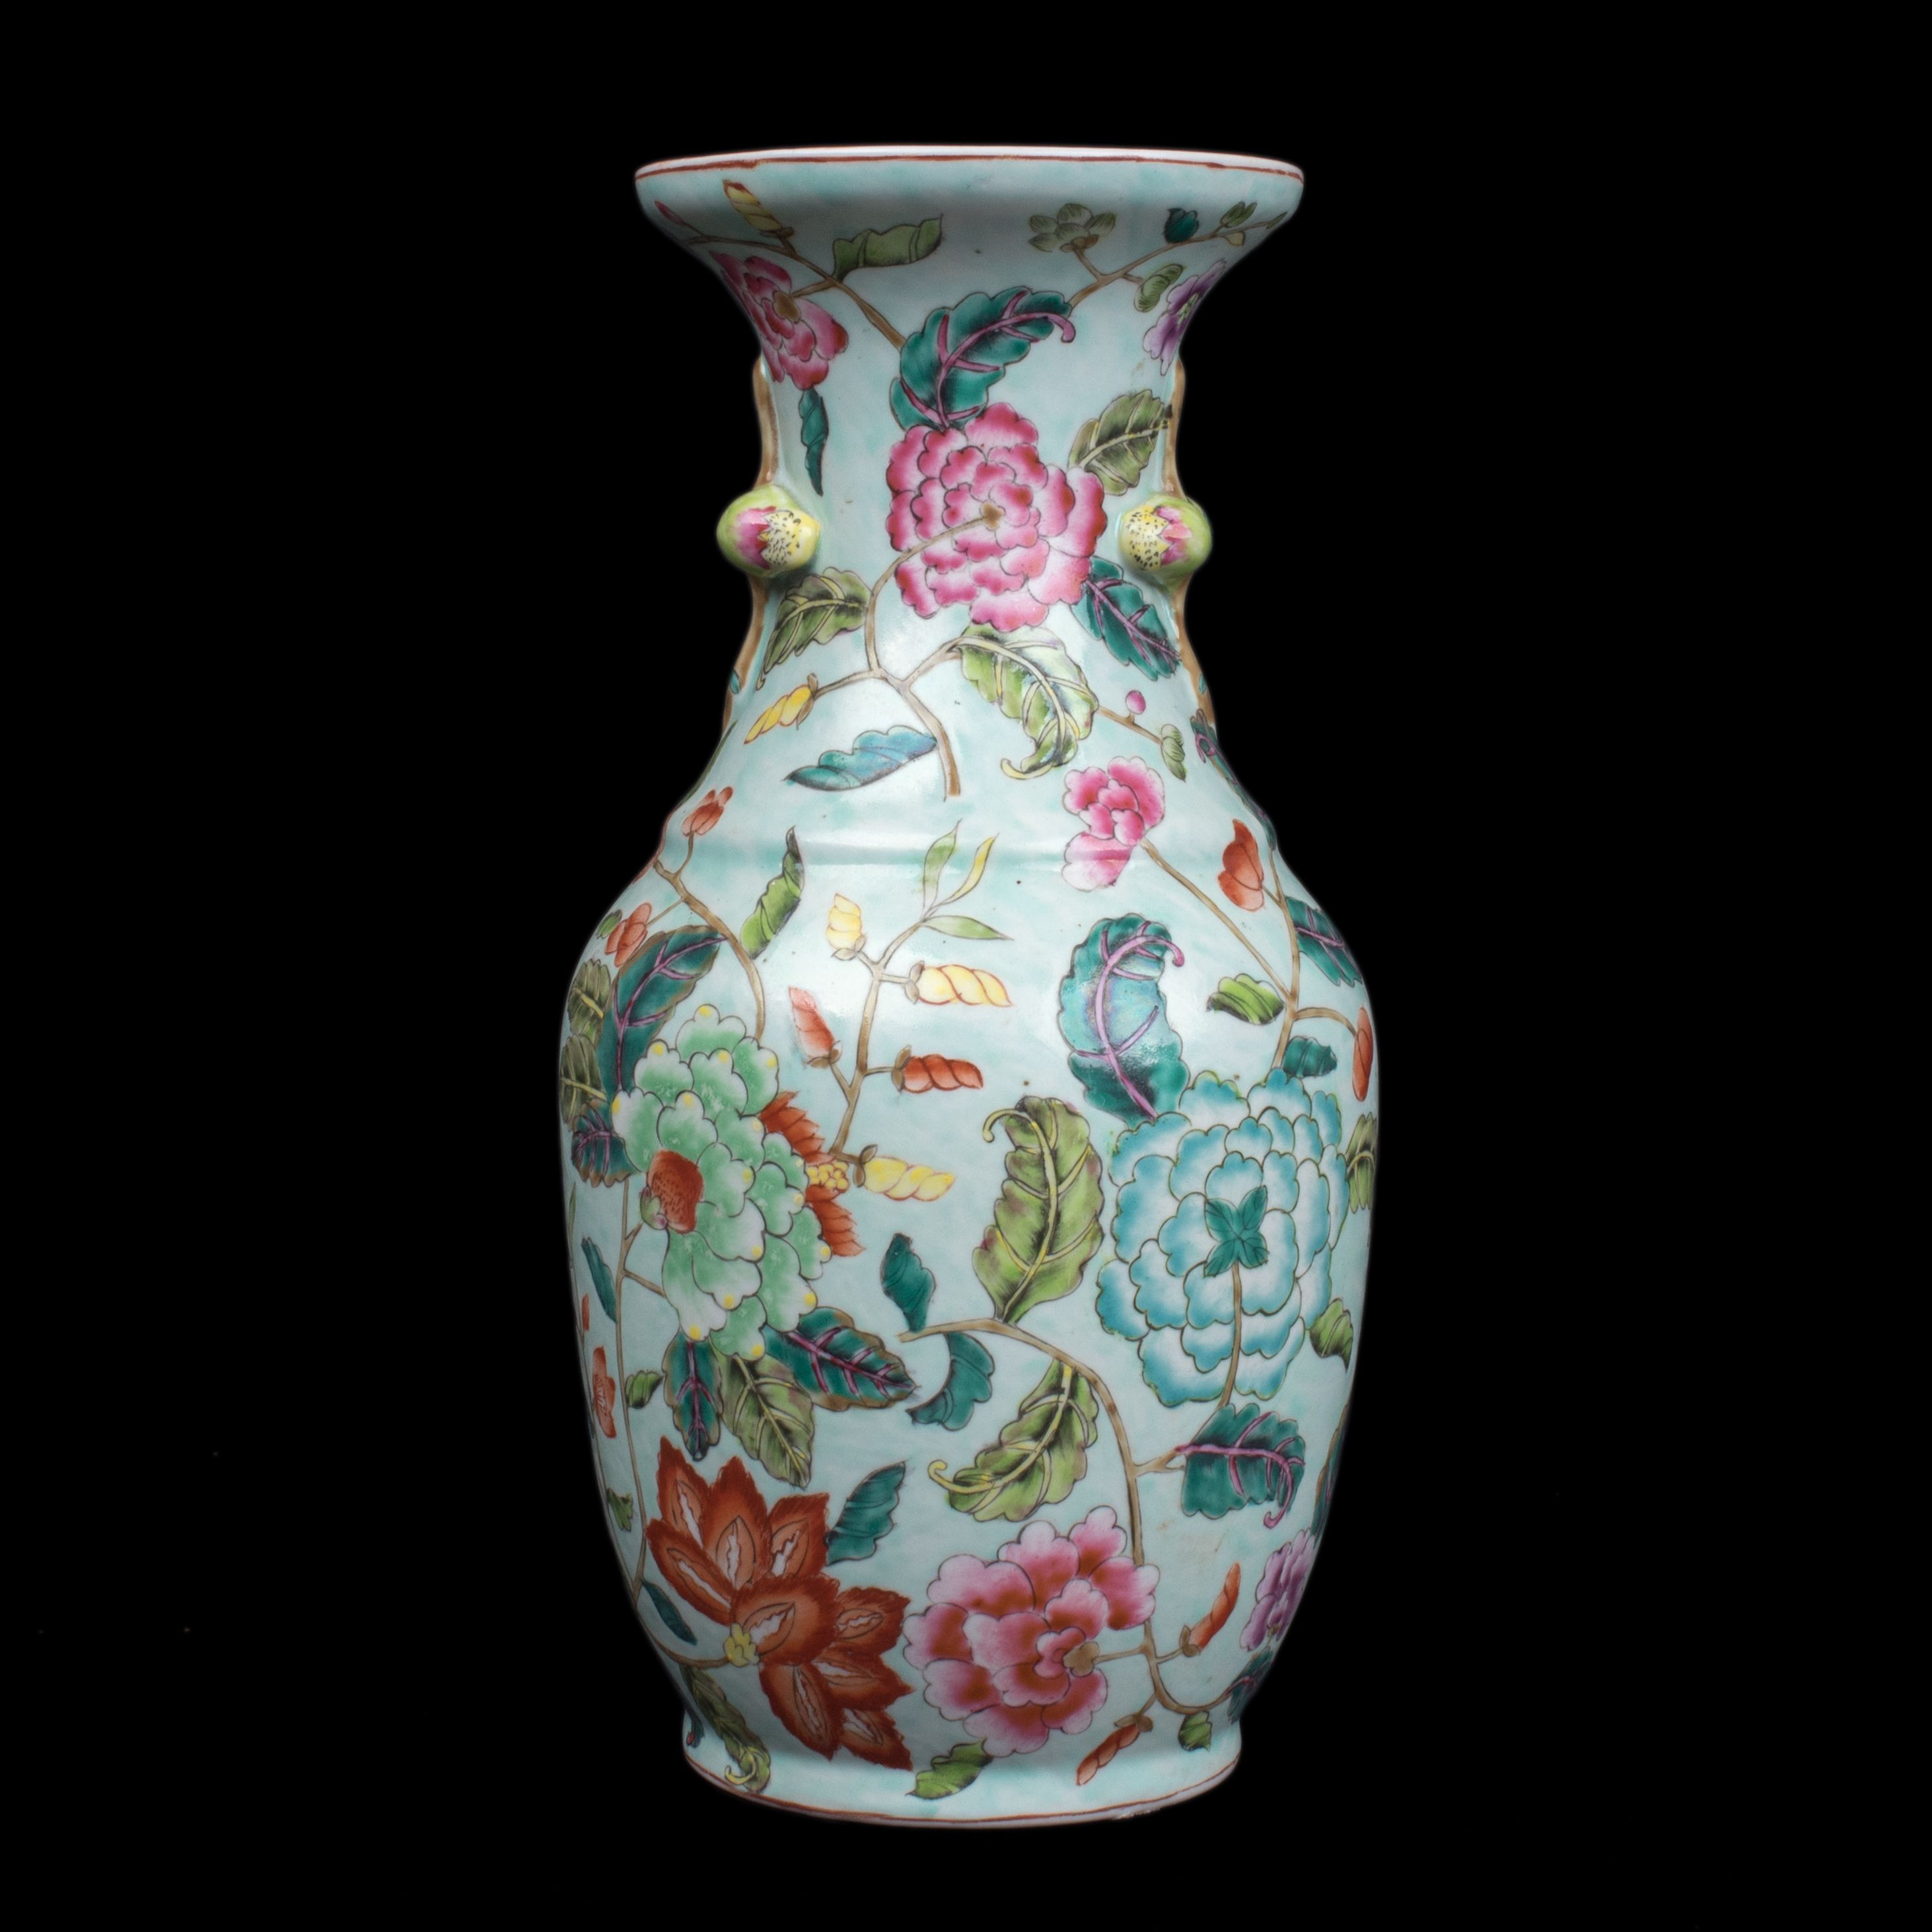 20 Awesome Lenox China Vase 2024 free download lenox china vase of details zu thailand 20 jh ganesha a thai bronze figure throughout description a chinese baluster porcelain vase decorated in early 19th century canton export style with